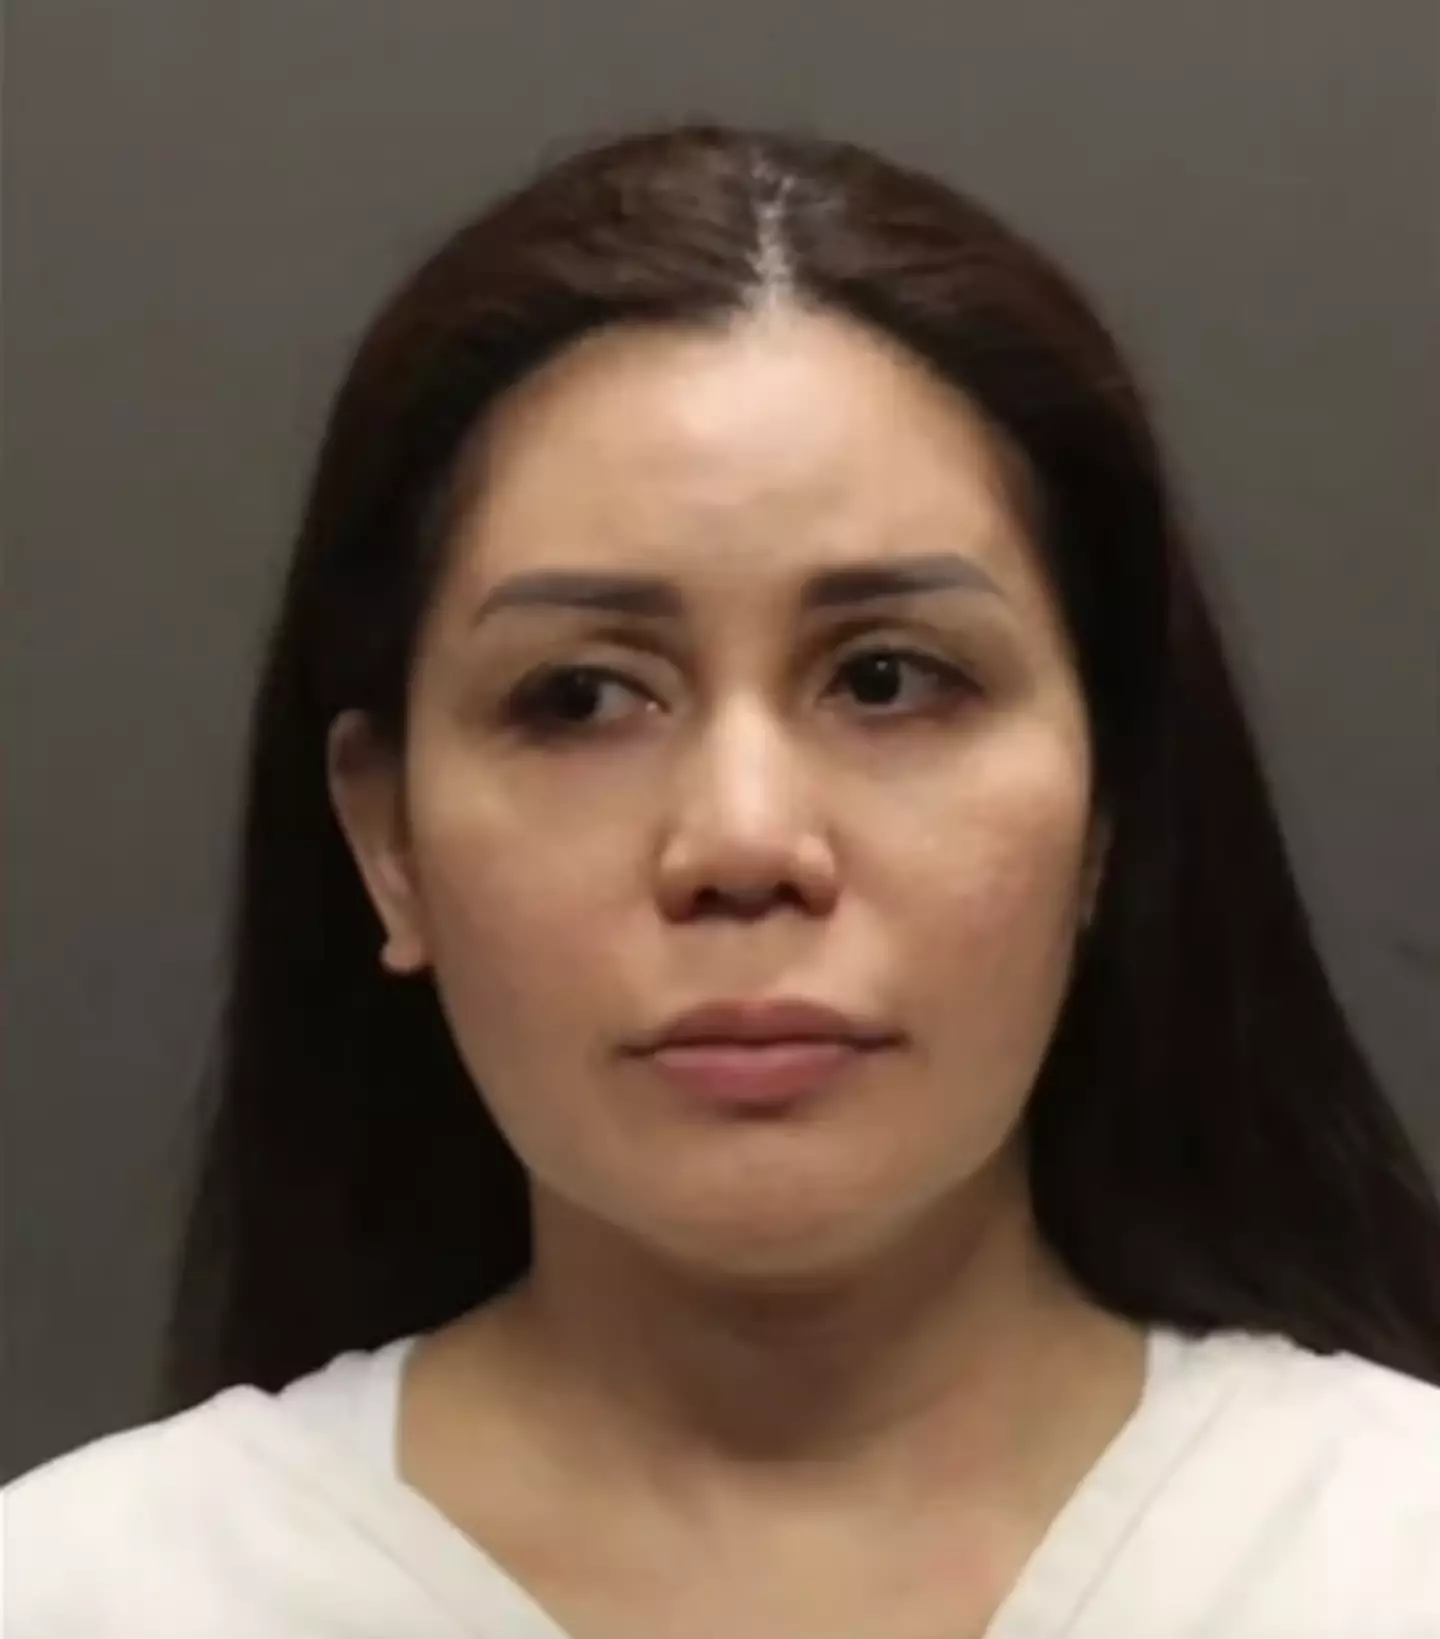 Melody Felicano Johnson has been indicted on charges of attempted first-degree murder, attempting to commit aggravated assault and poisoning food or drink.